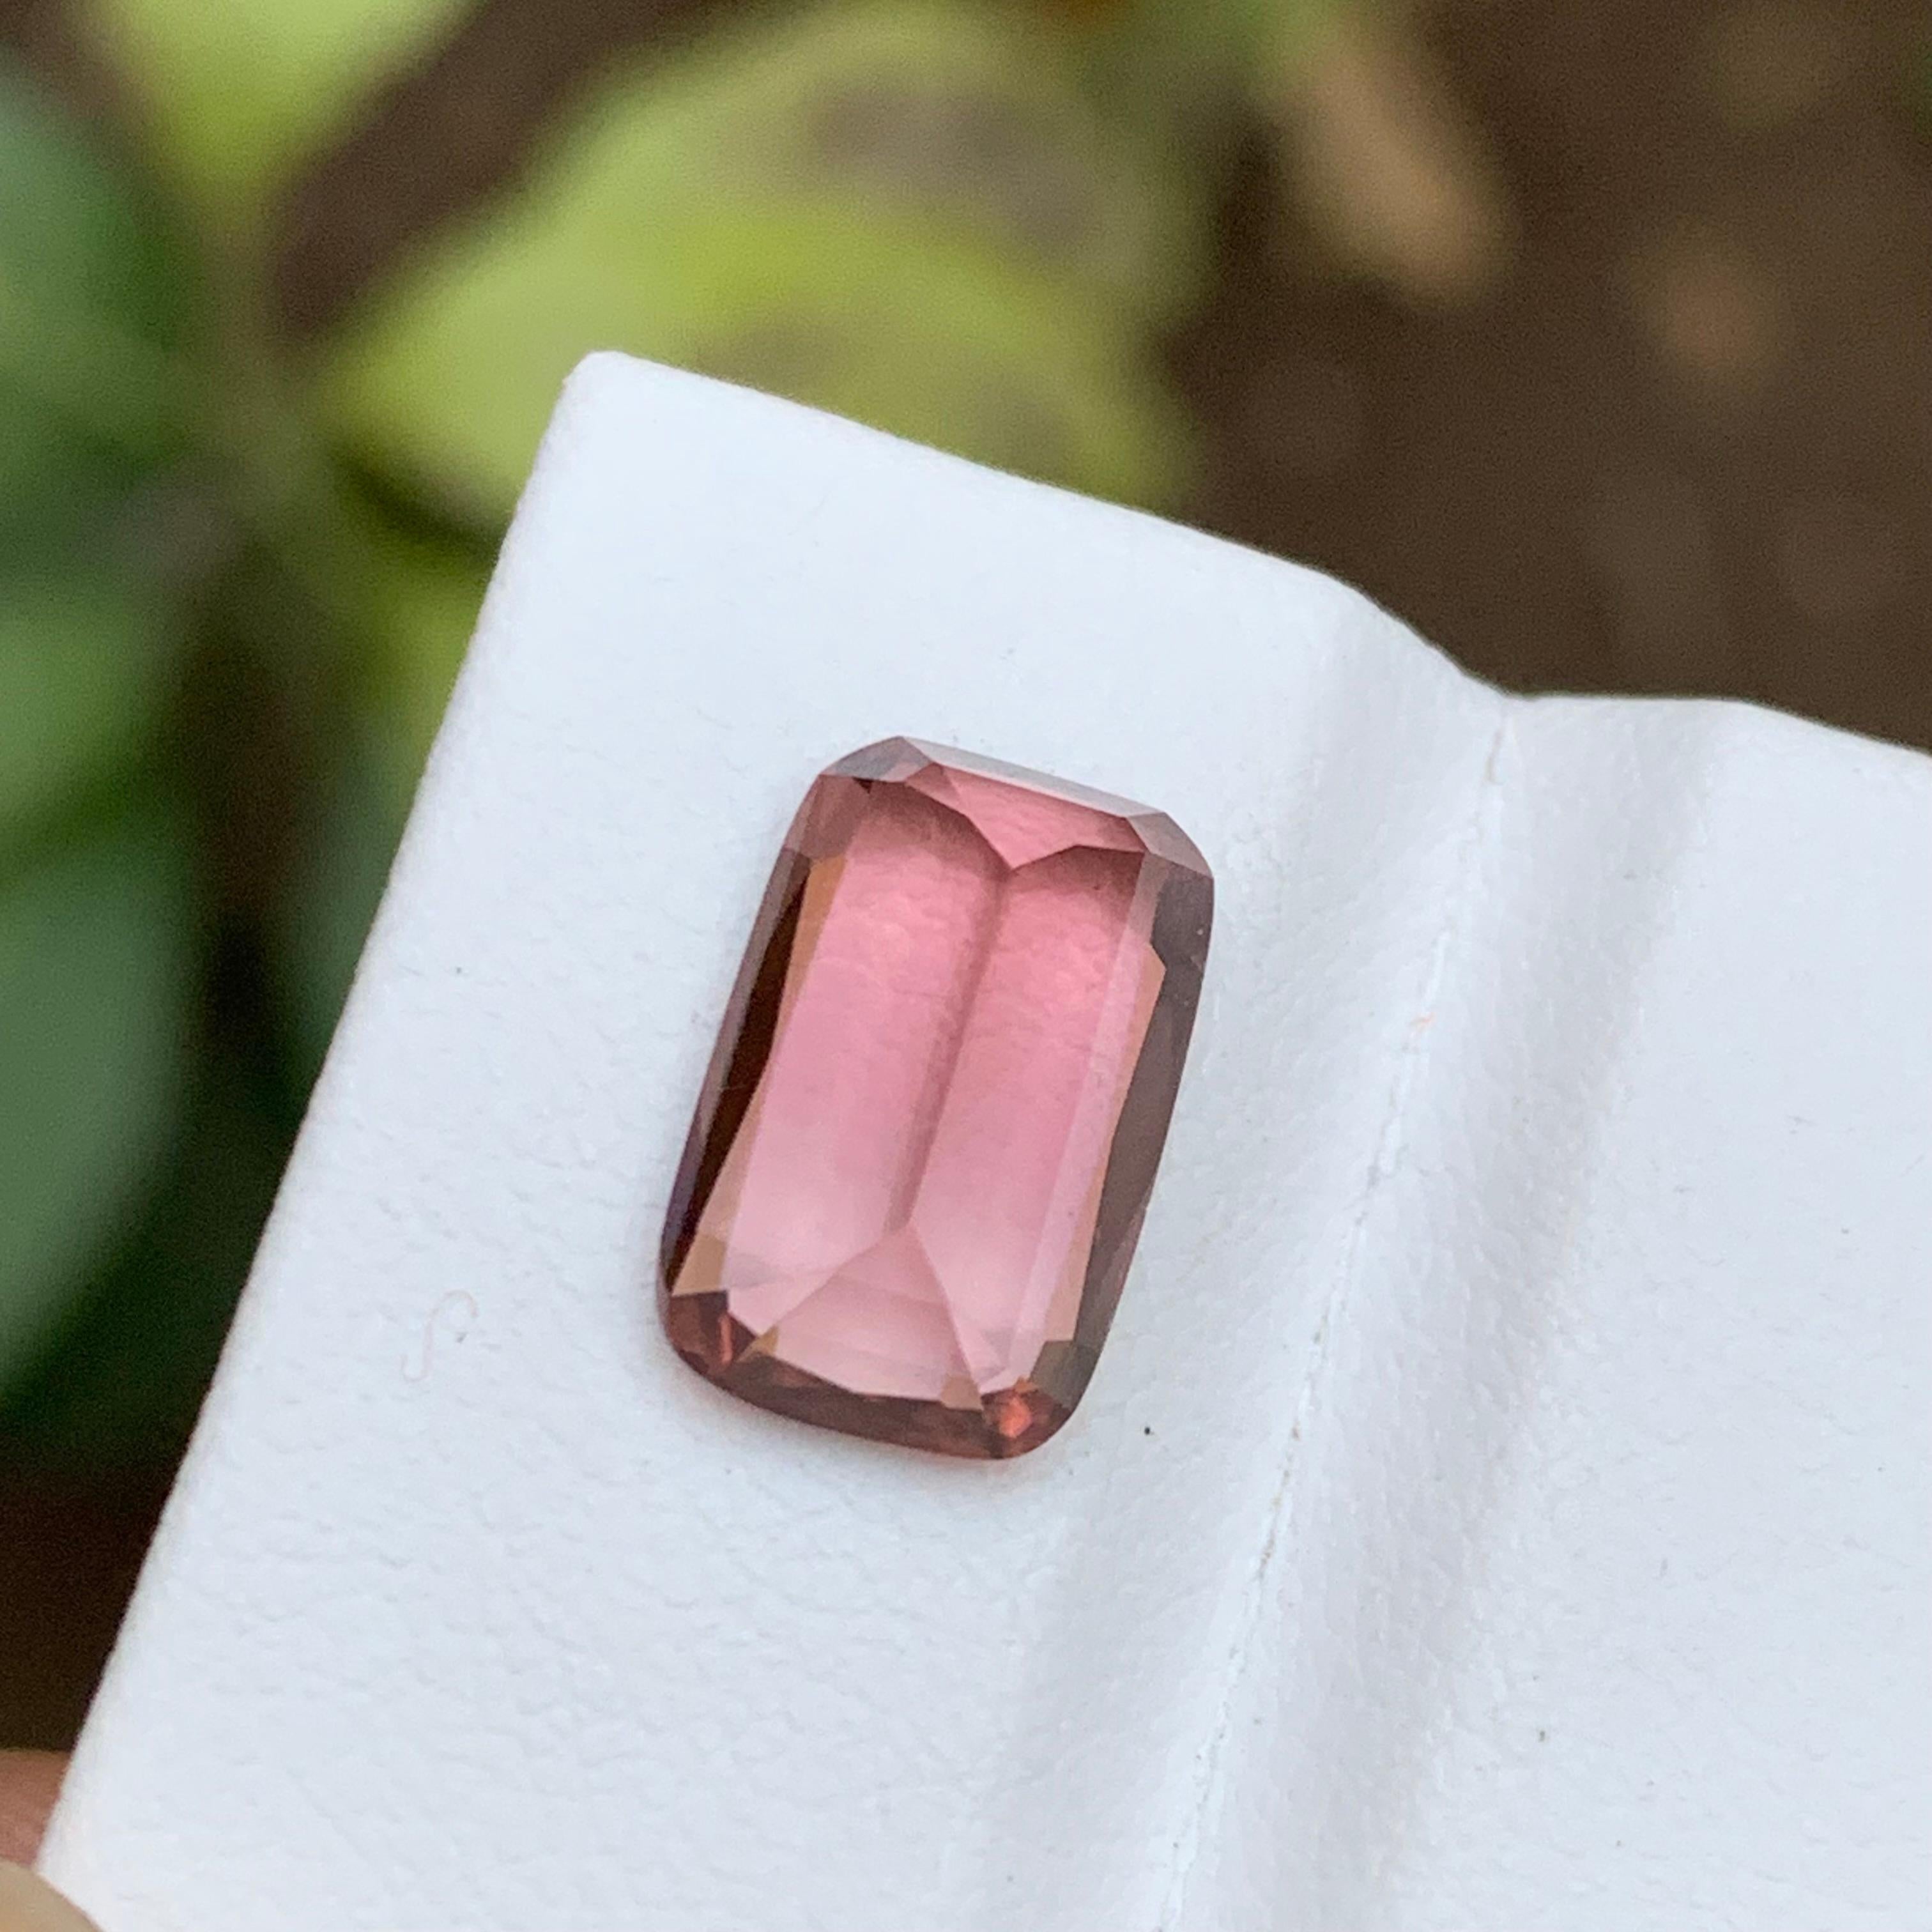 Women's or Men's Rare Pink Natural Tourmaline Gemstone 4Ct Brilliant Cushion Cut for Ring/Pendant For Sale